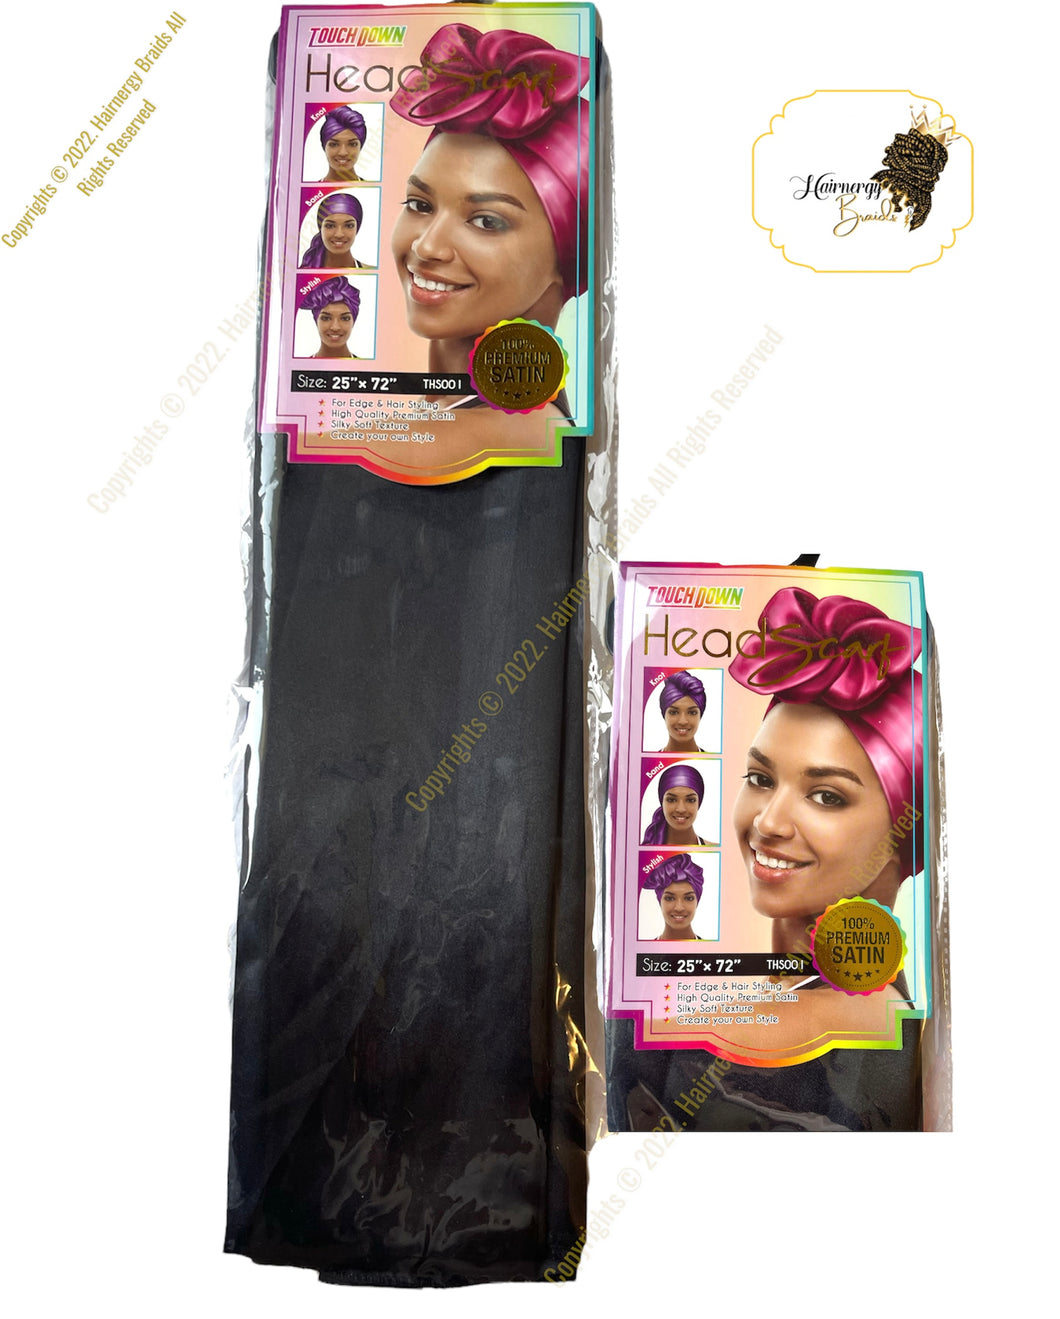 Touch Down Self Styled Head Scarf (Black)